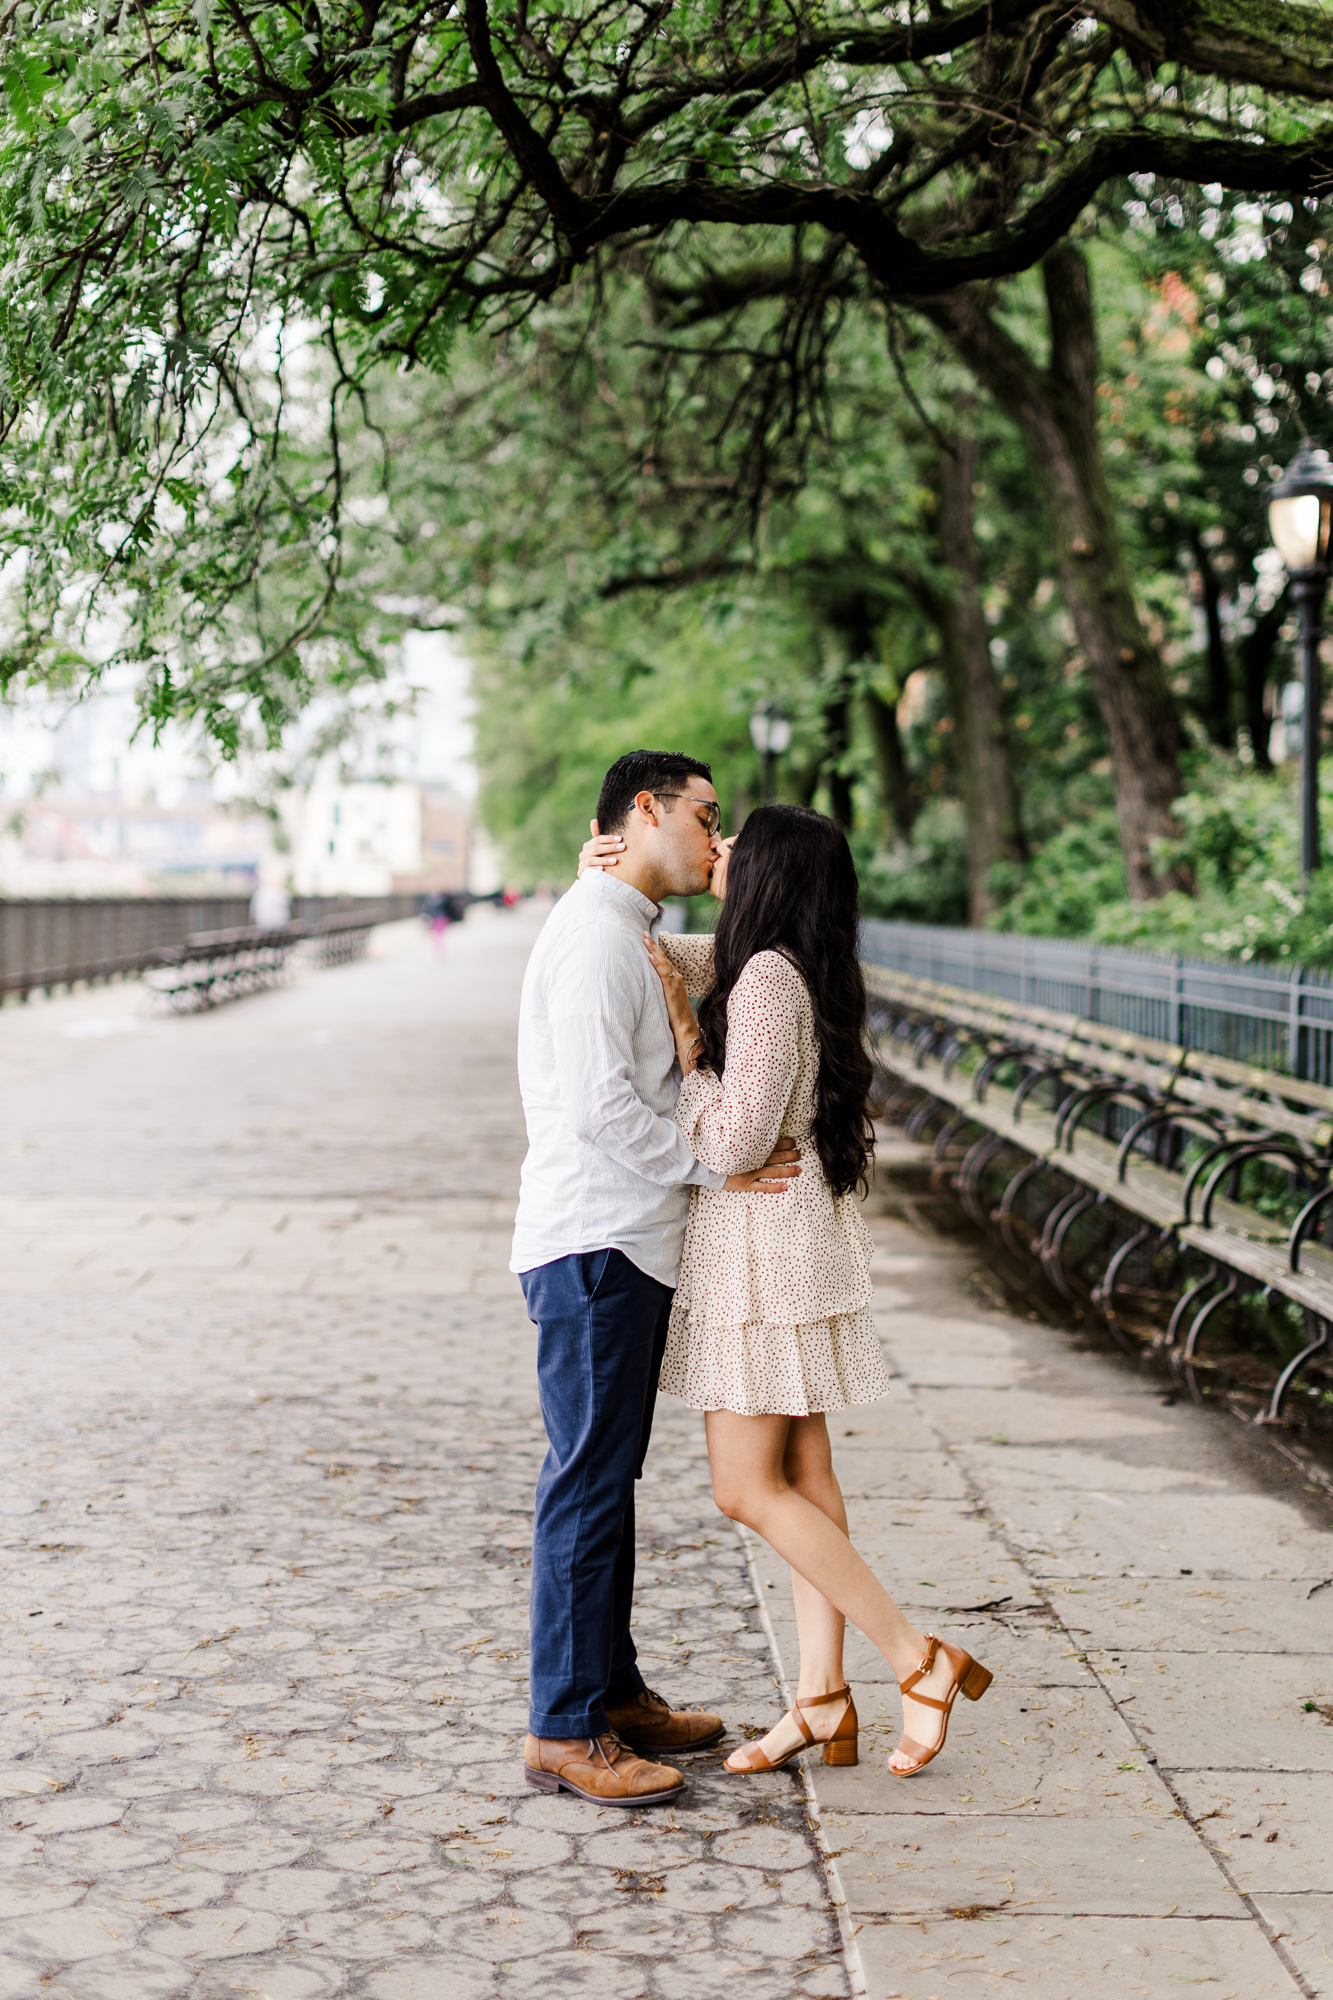 Intimate Brooklyn Heights Promenade Engagement Photography